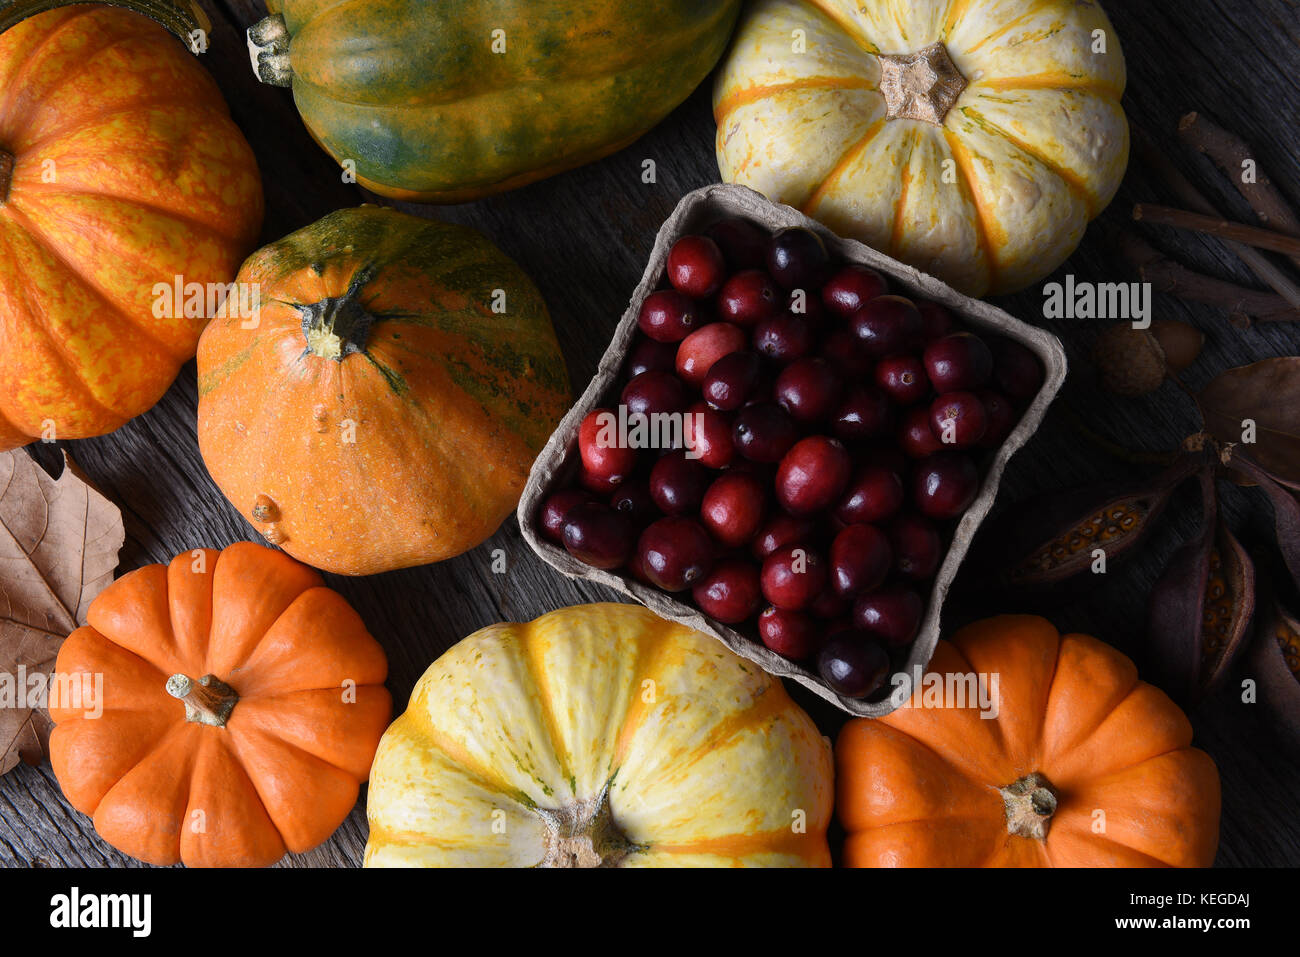 Autumn Still Life: Top view of an assortment of Fall decorative gourds, squash and pumpkins around a basket of fresh cranberries. Stock Photo